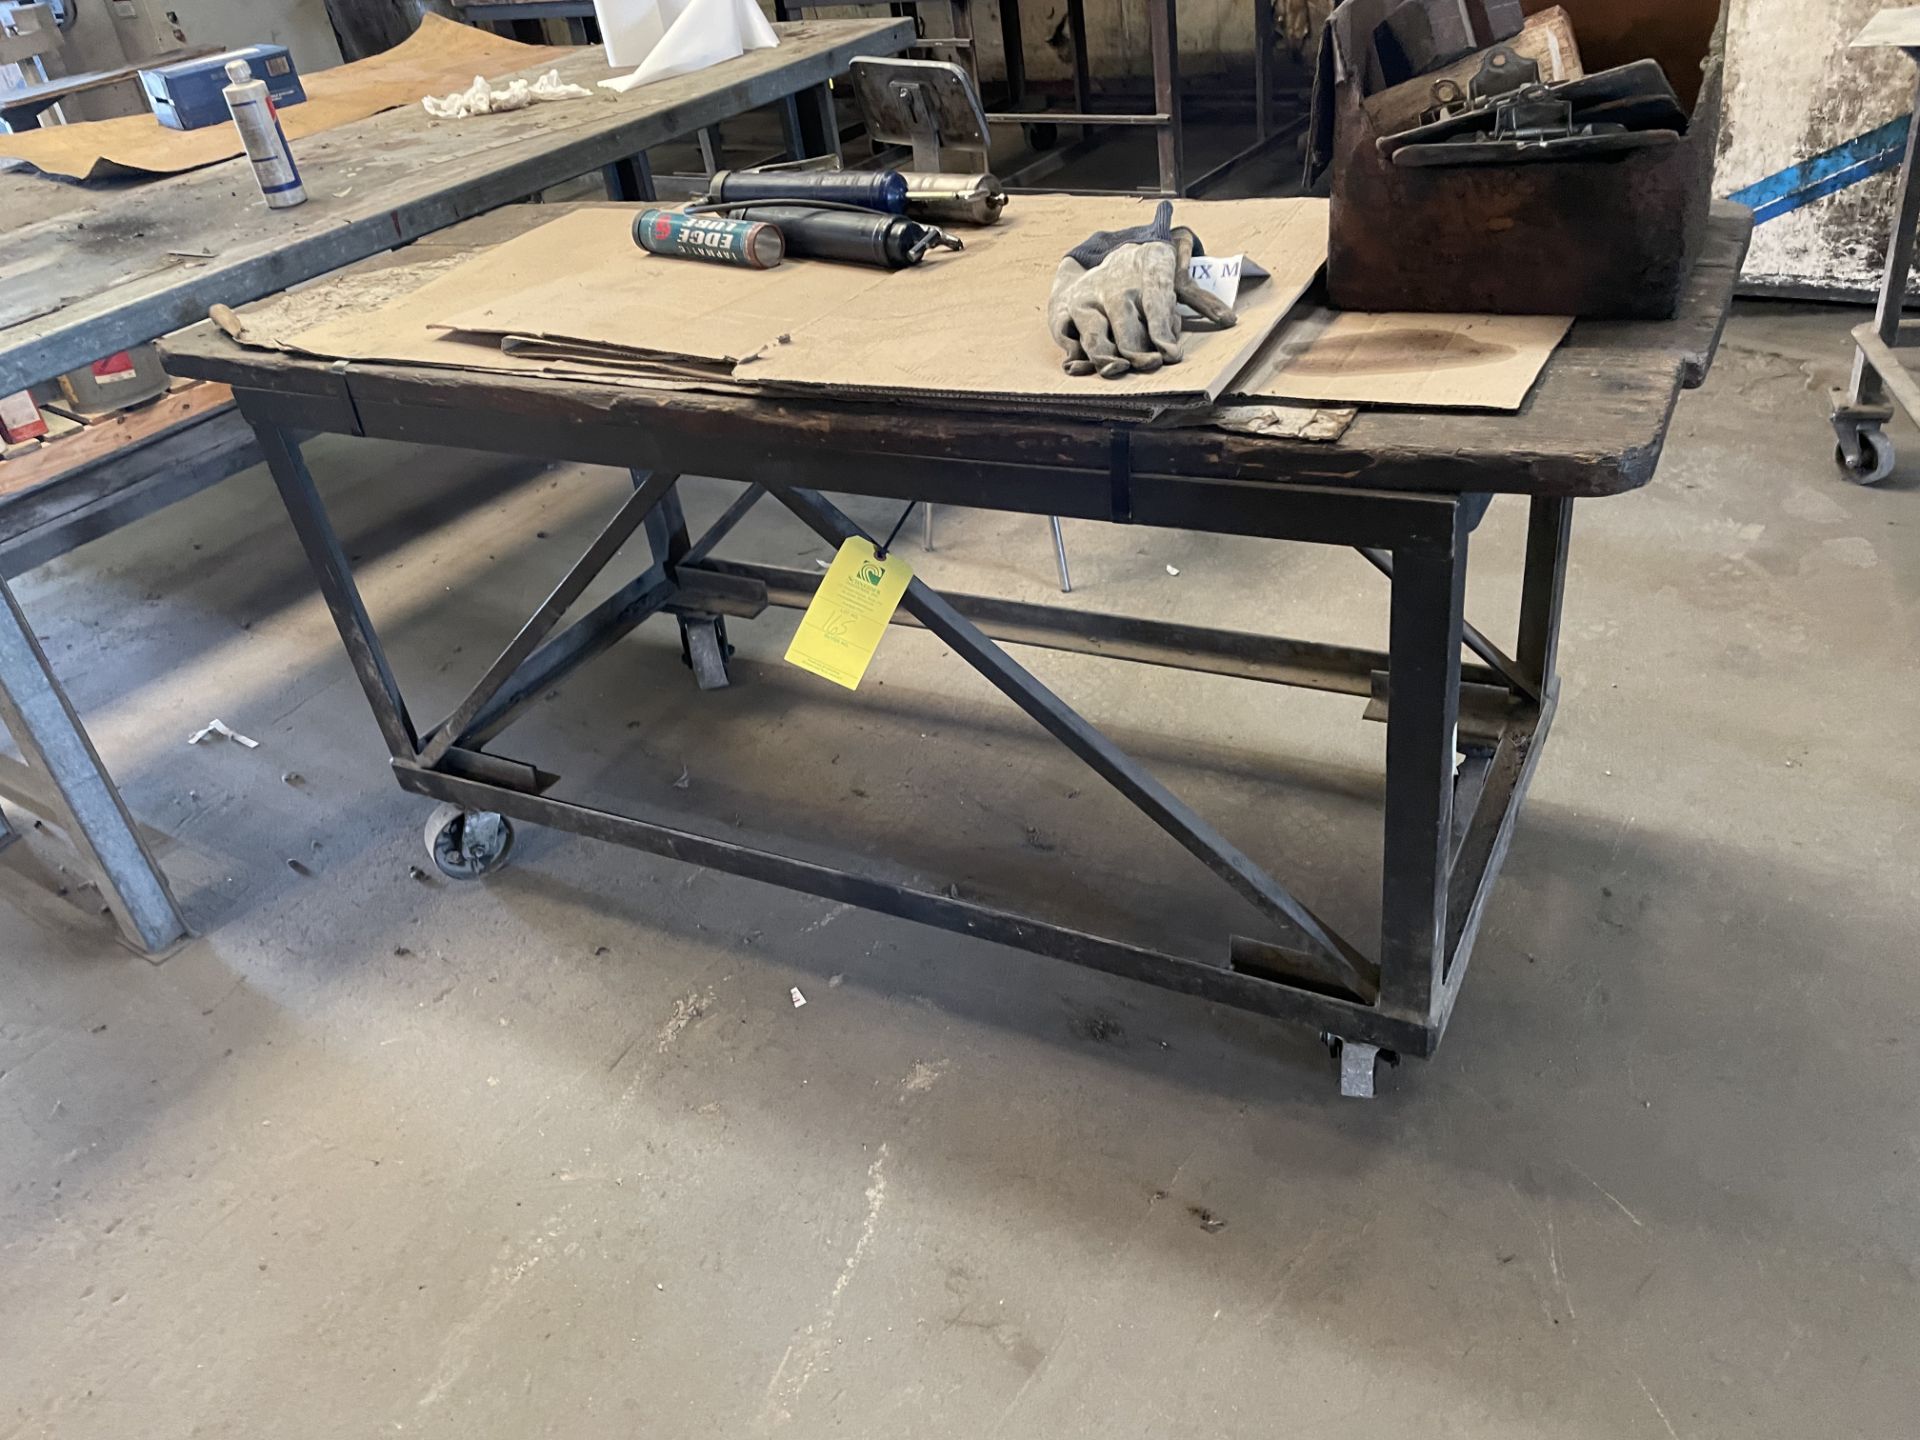 Shop Table on Casters